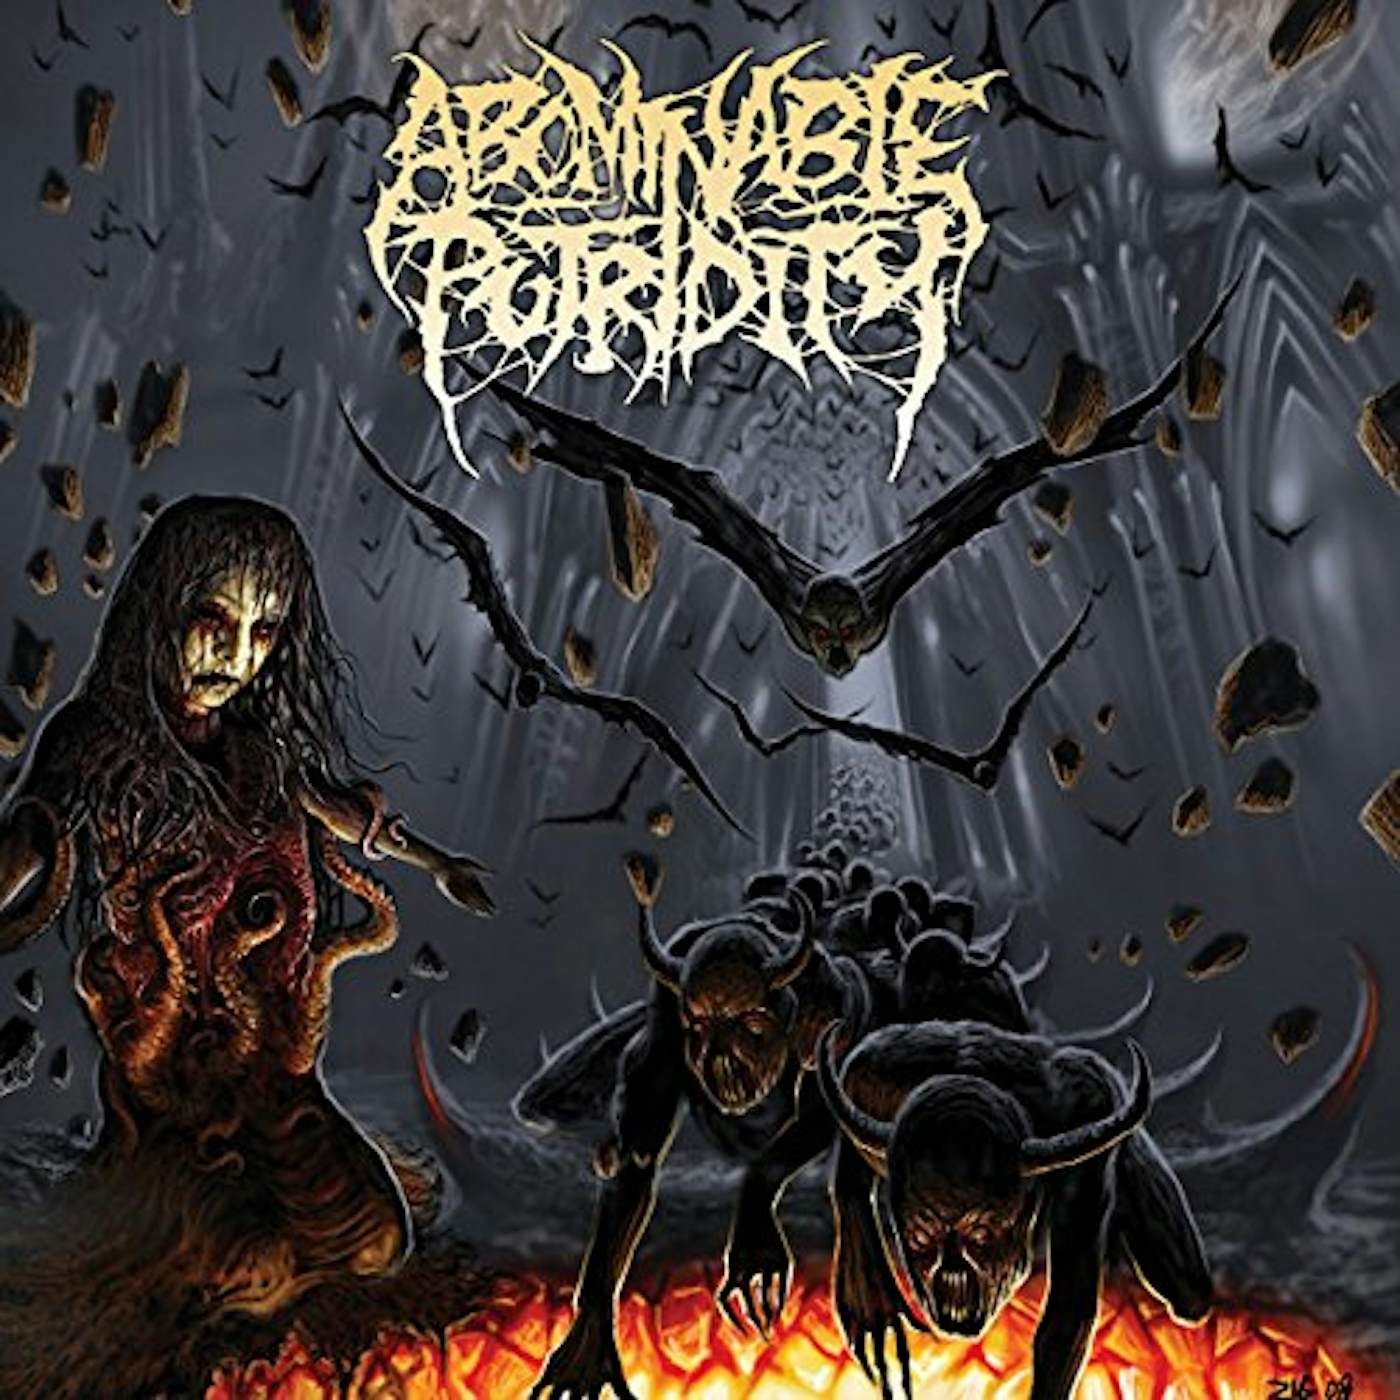 Abominable Putridity In the End of Human Existence Vinyl Record